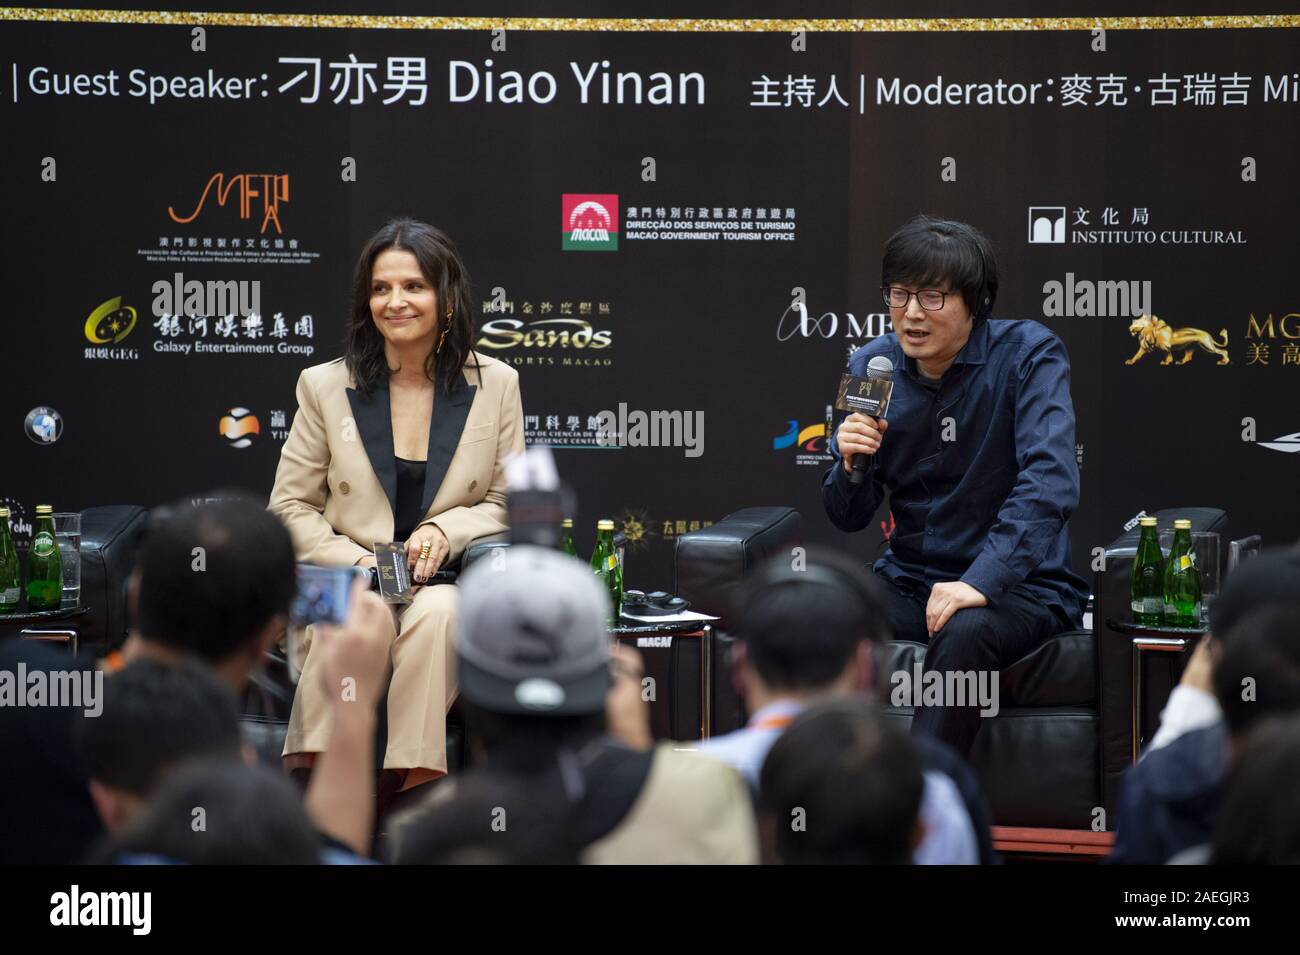 December 9, 2019, Macao, Macao SAR, China: MACAO,MACAO SAR,CHINA: NOVEMBER 6th 2019. The 4th International Film festival and Awards Macao 2019 ( IFFAM 2019) French actress, Juliette Binoche joins Chinese Director, Diao Yinan (R) in conversation about her films the the IFFAM artistic director, Mike Goodridge moderating at the Macau cultural centre (Credit Image: © Jayne Russell/ZUMA Wire) Stock Photo